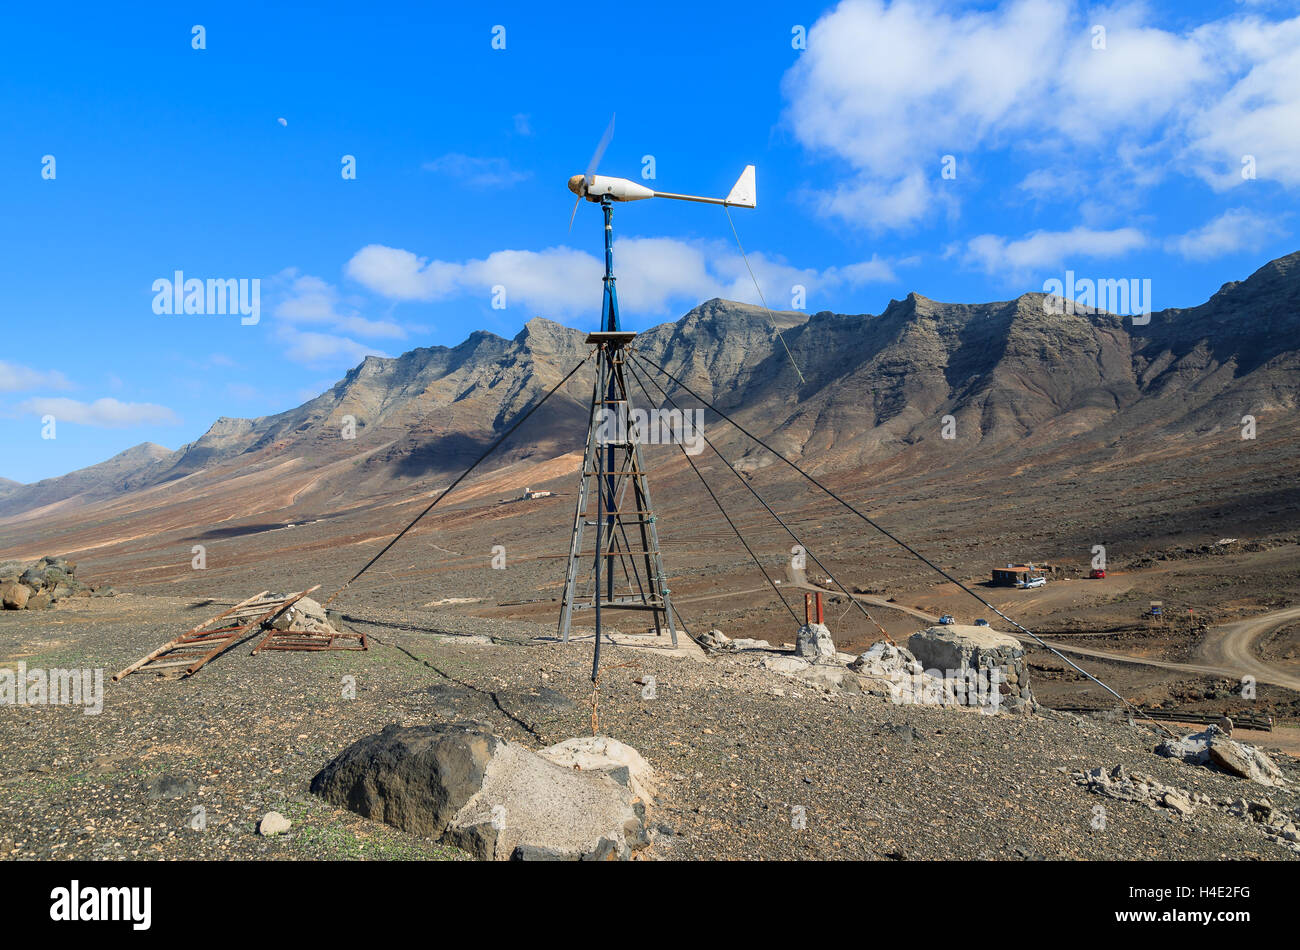 Windmill at Cofete beach for electricity generation, Fuerteventura, Canary Islands, Spain Stock Photo